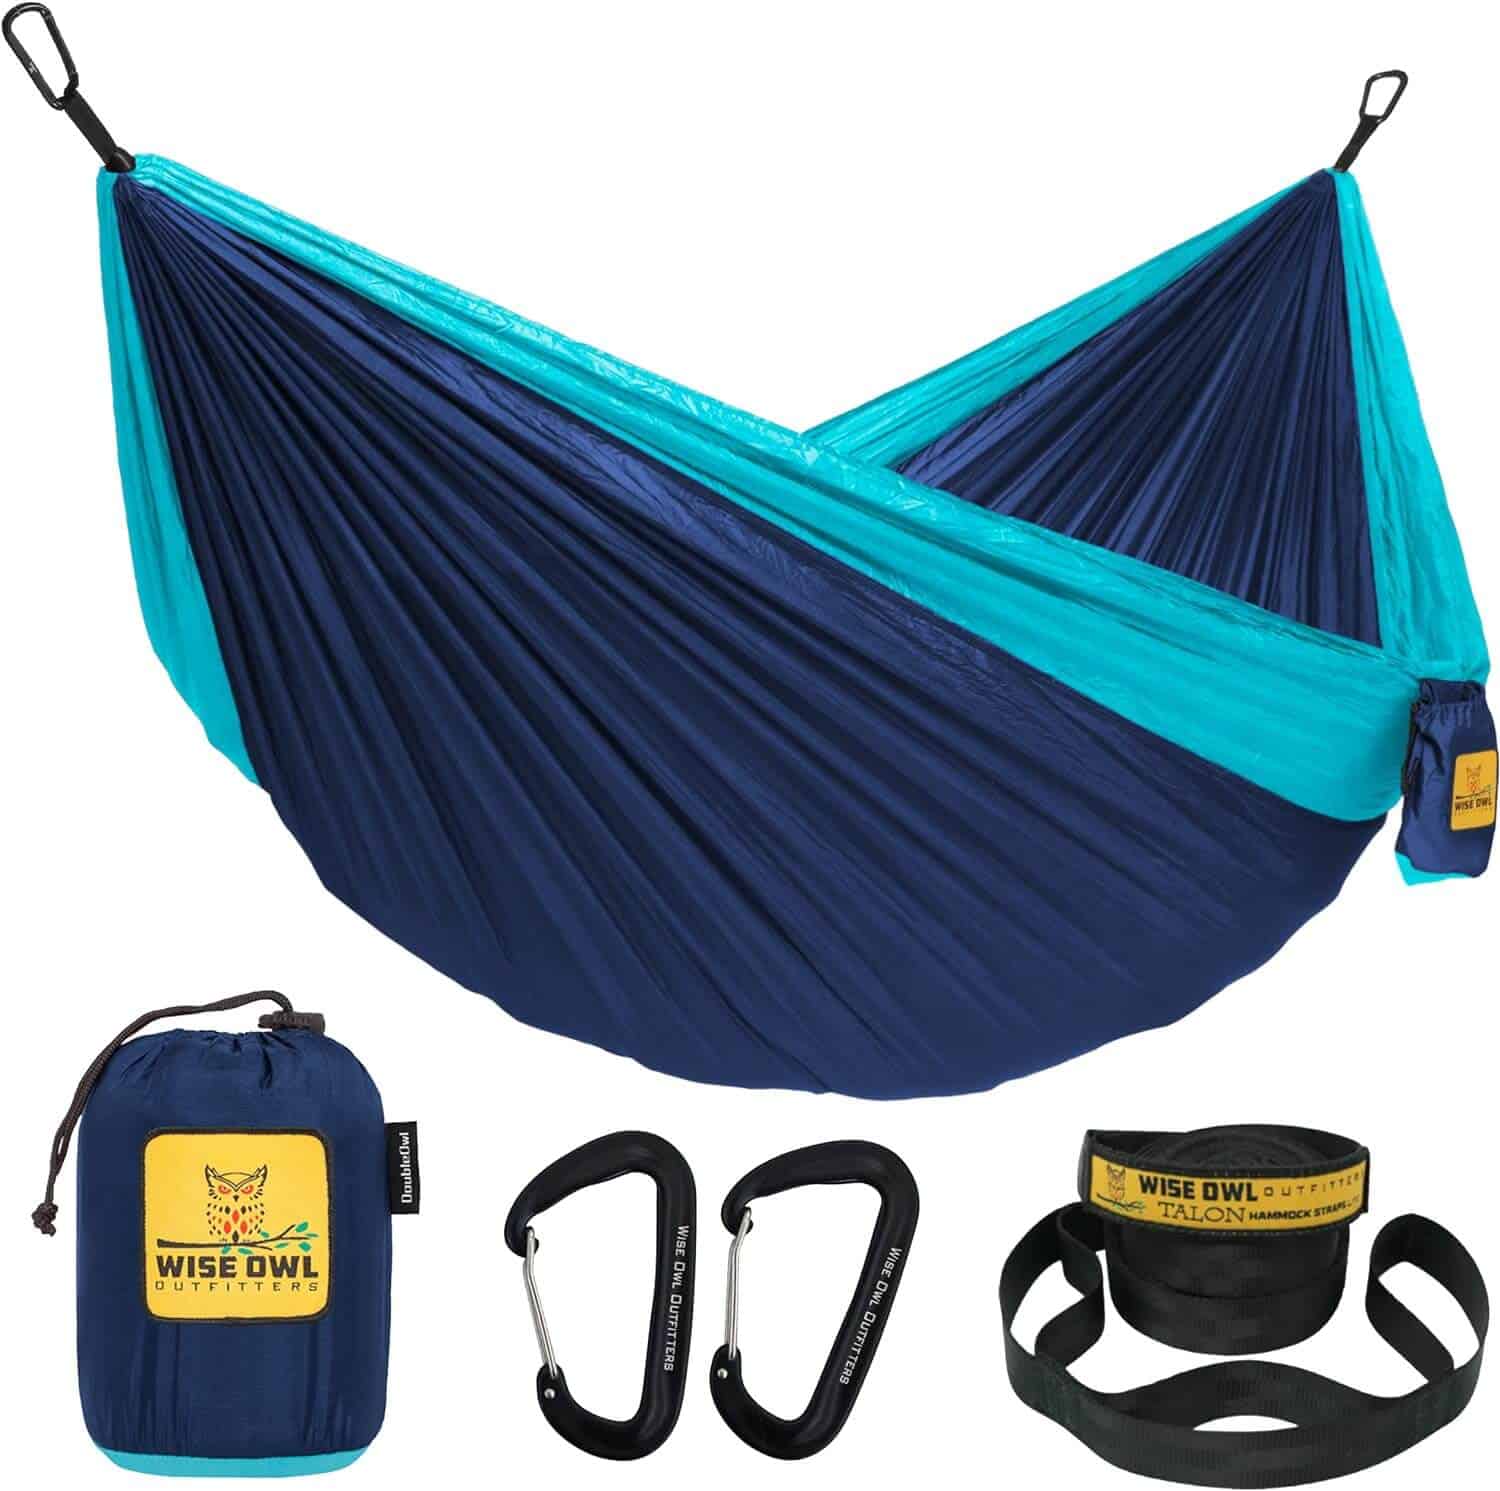 Portable camping hammock for teens for camping trips, hiking, the lake or the backyard.